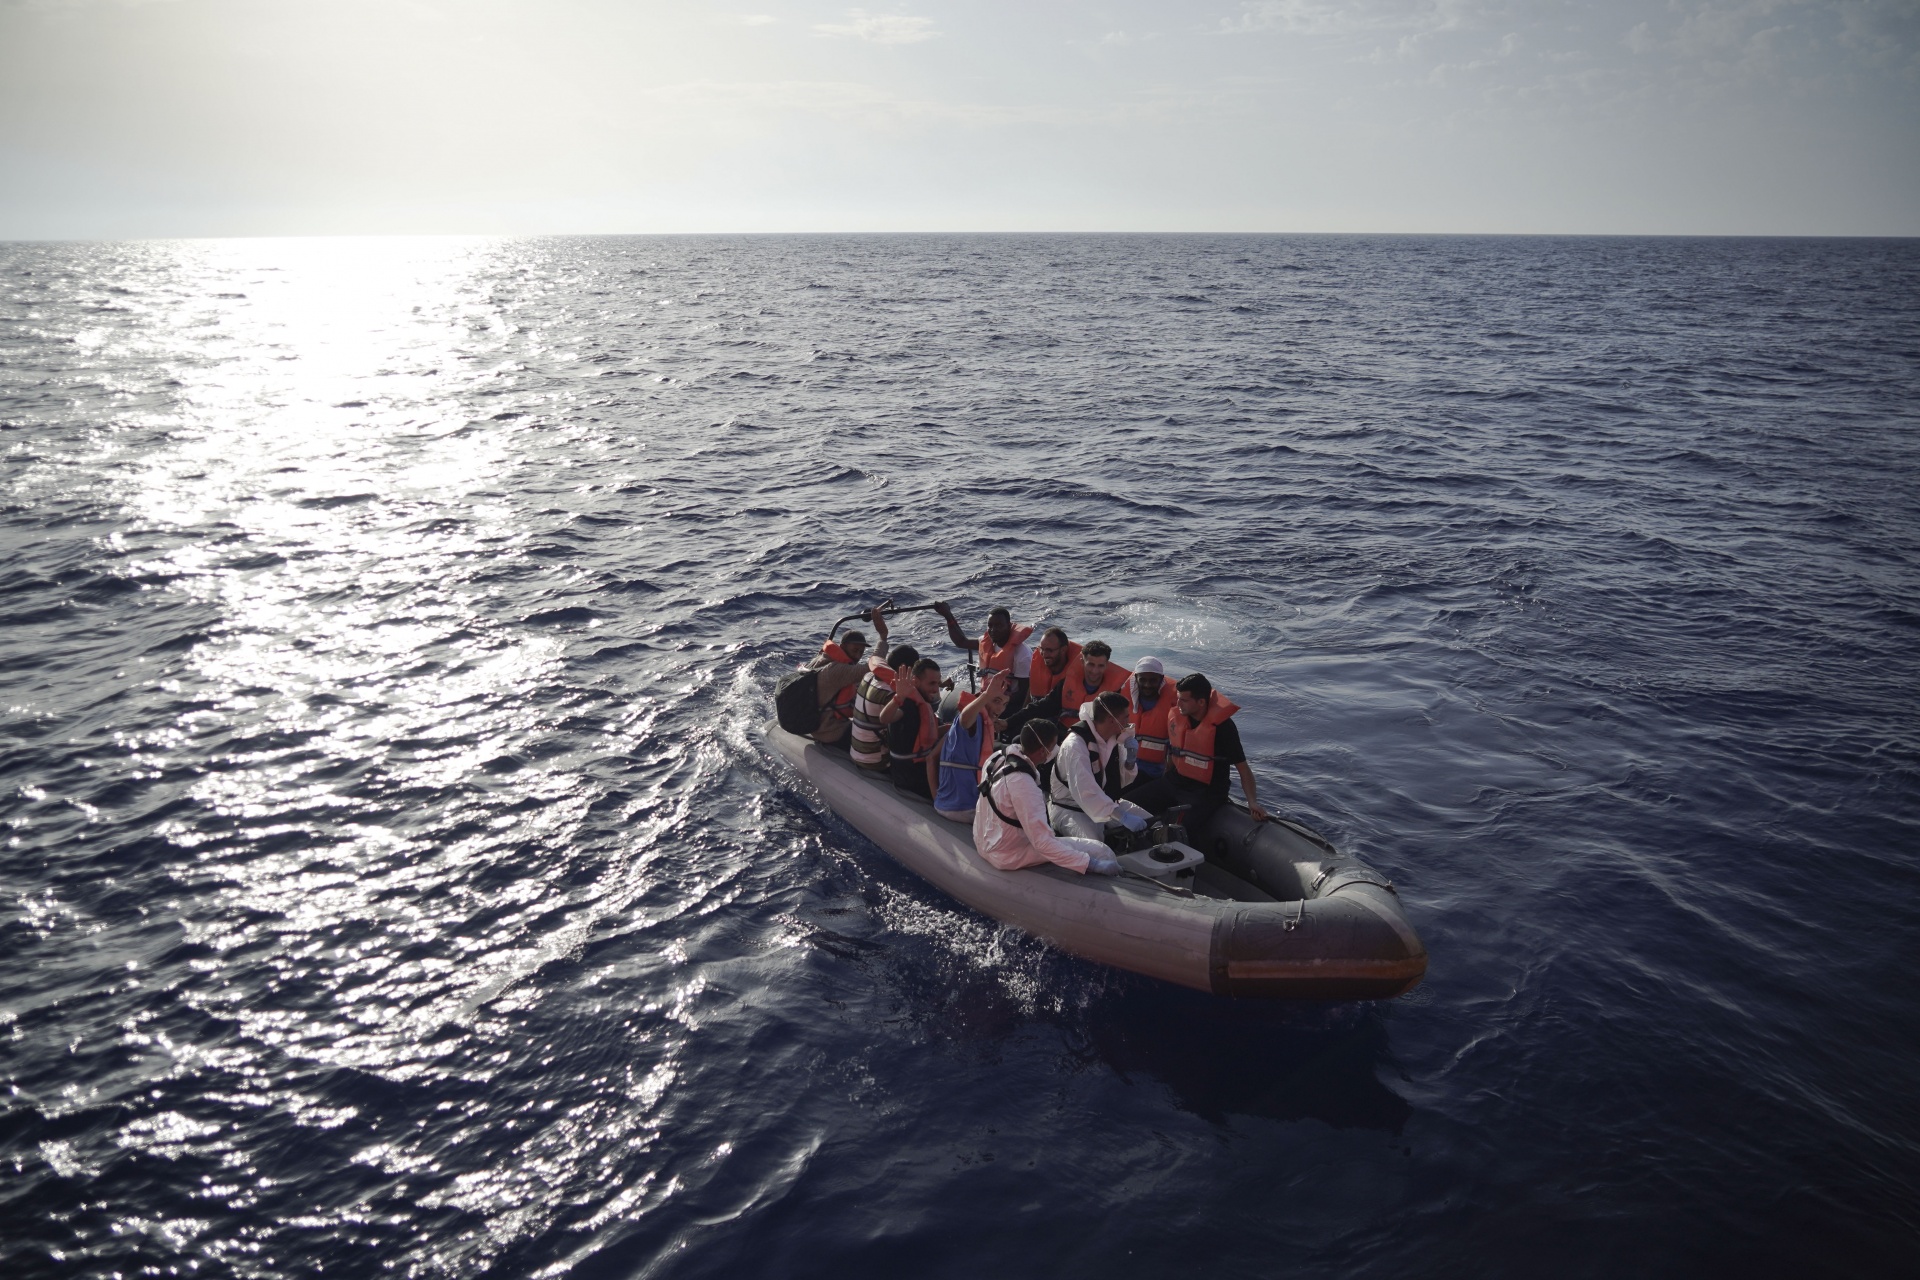 Members of the Maltese Armed Forces take a group of migrants to a Maltese military ship in the Mediterranean Sea